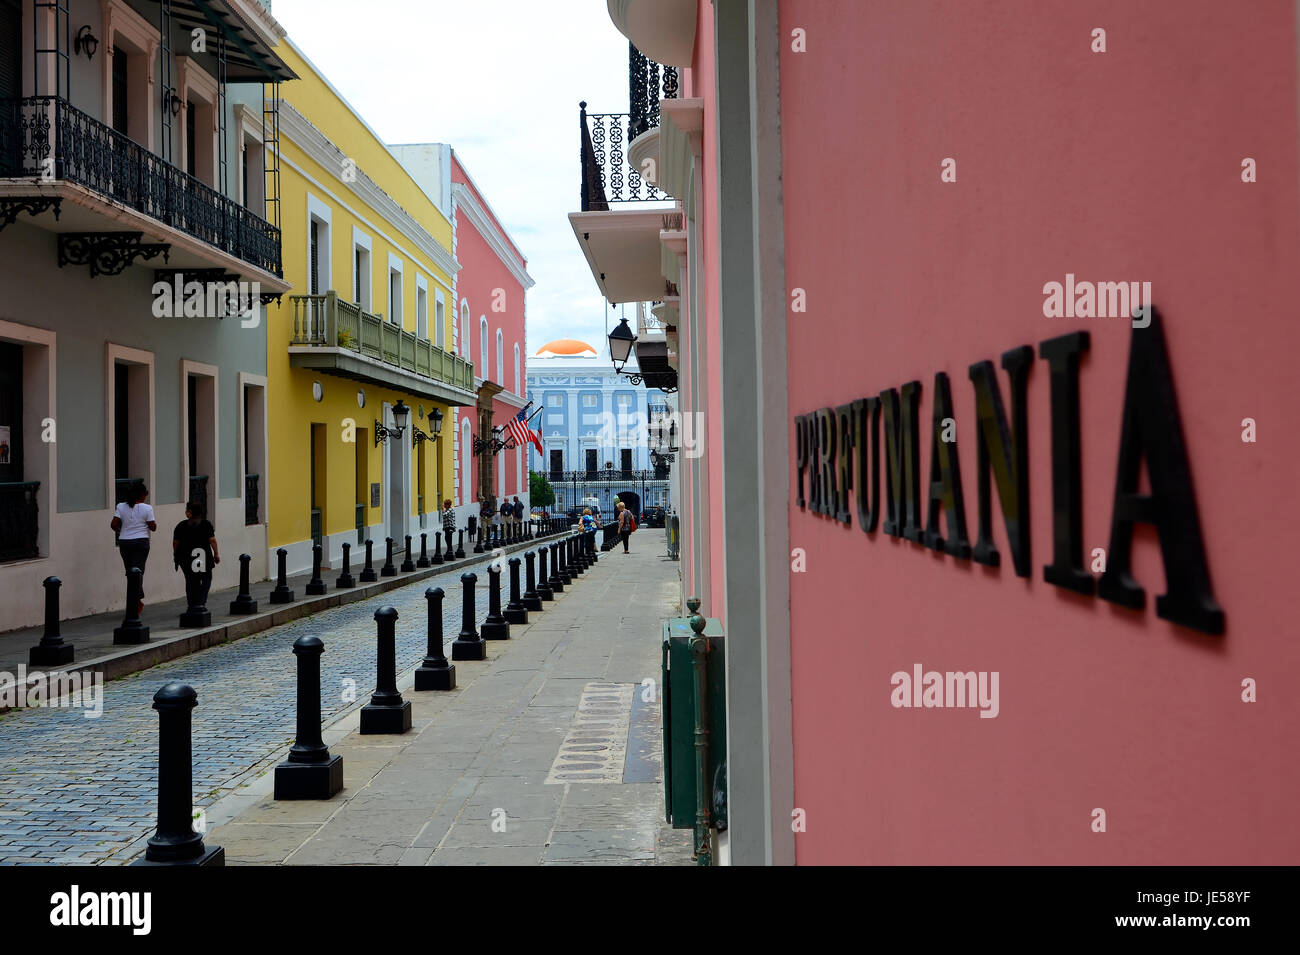 A look down a colorful street in the historical Old San Juan section of San Juan Puerto Rico Stock Photo